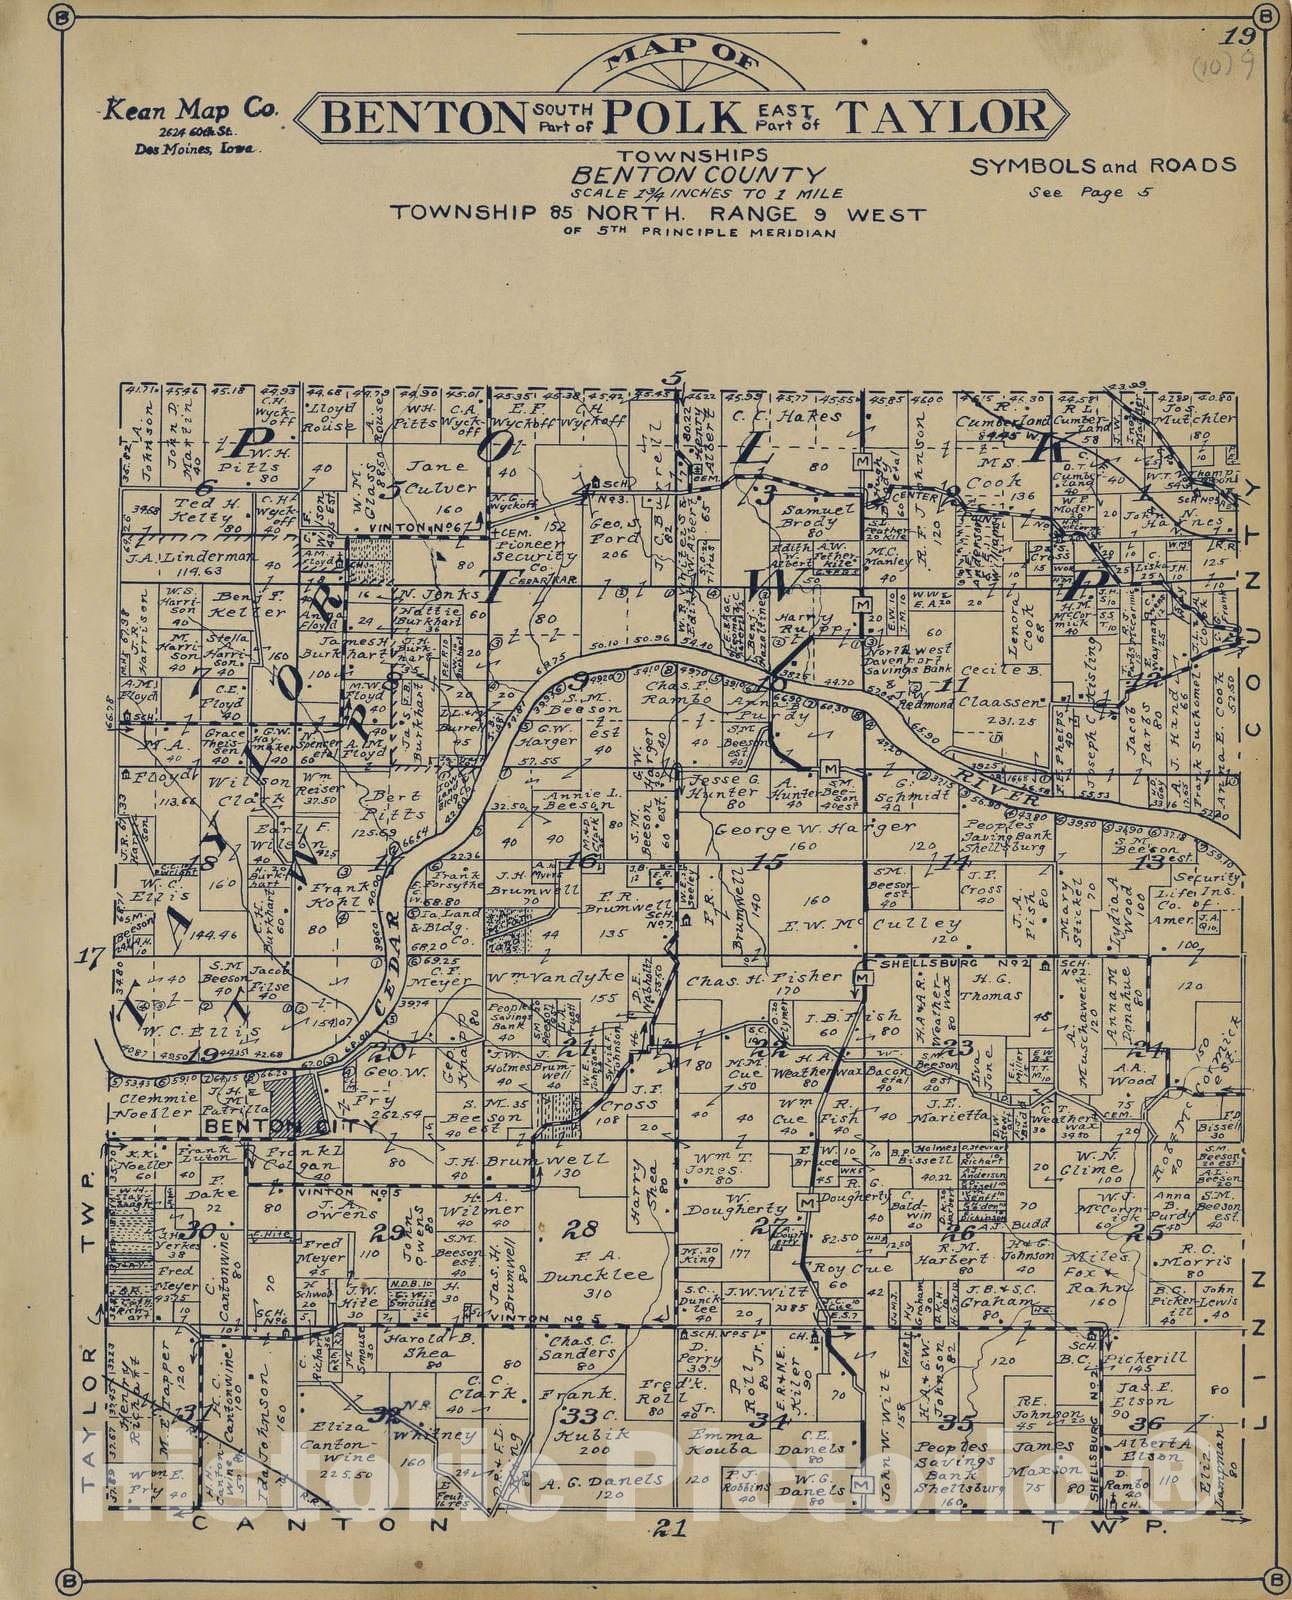 Historic 1930 Map - Atlas of Benton County, Iowa. - Benton, South Part of Polk, and East Part of Taylor Townships